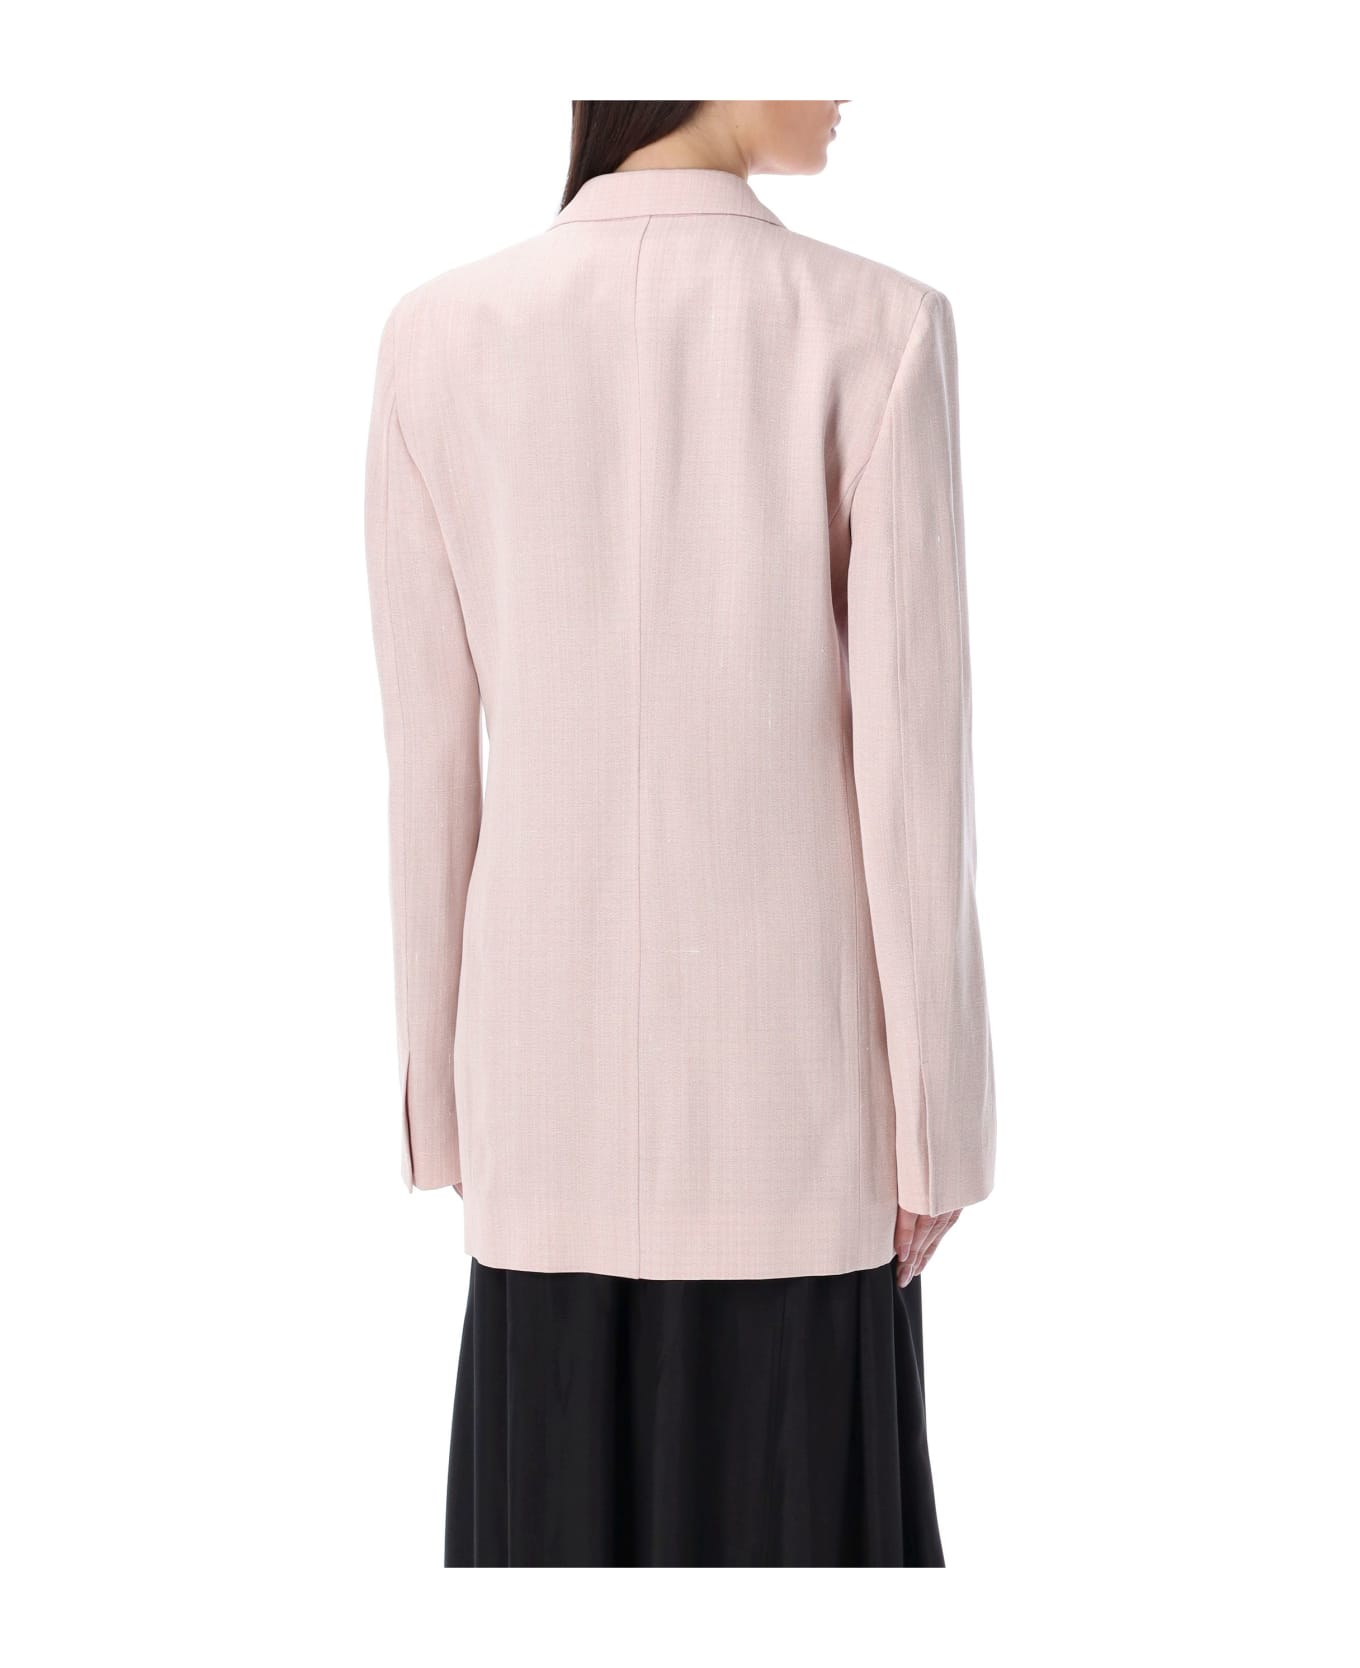 Jil Sander Tailored Double-breasted Balzer - ROSE